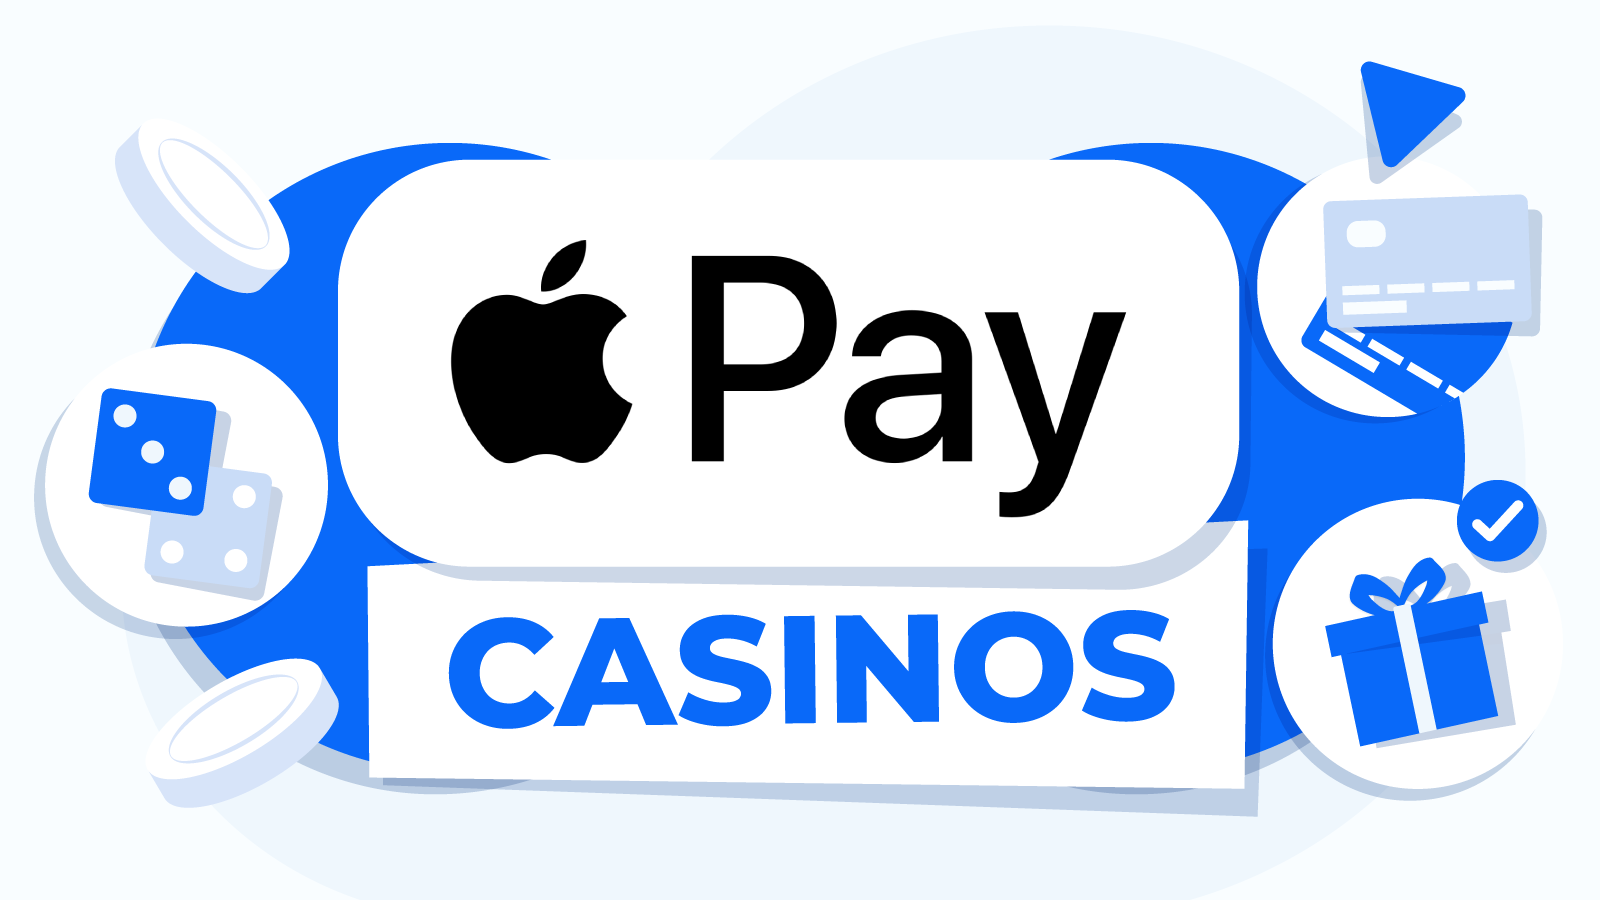 Top Apple Pay Casinos in the UK